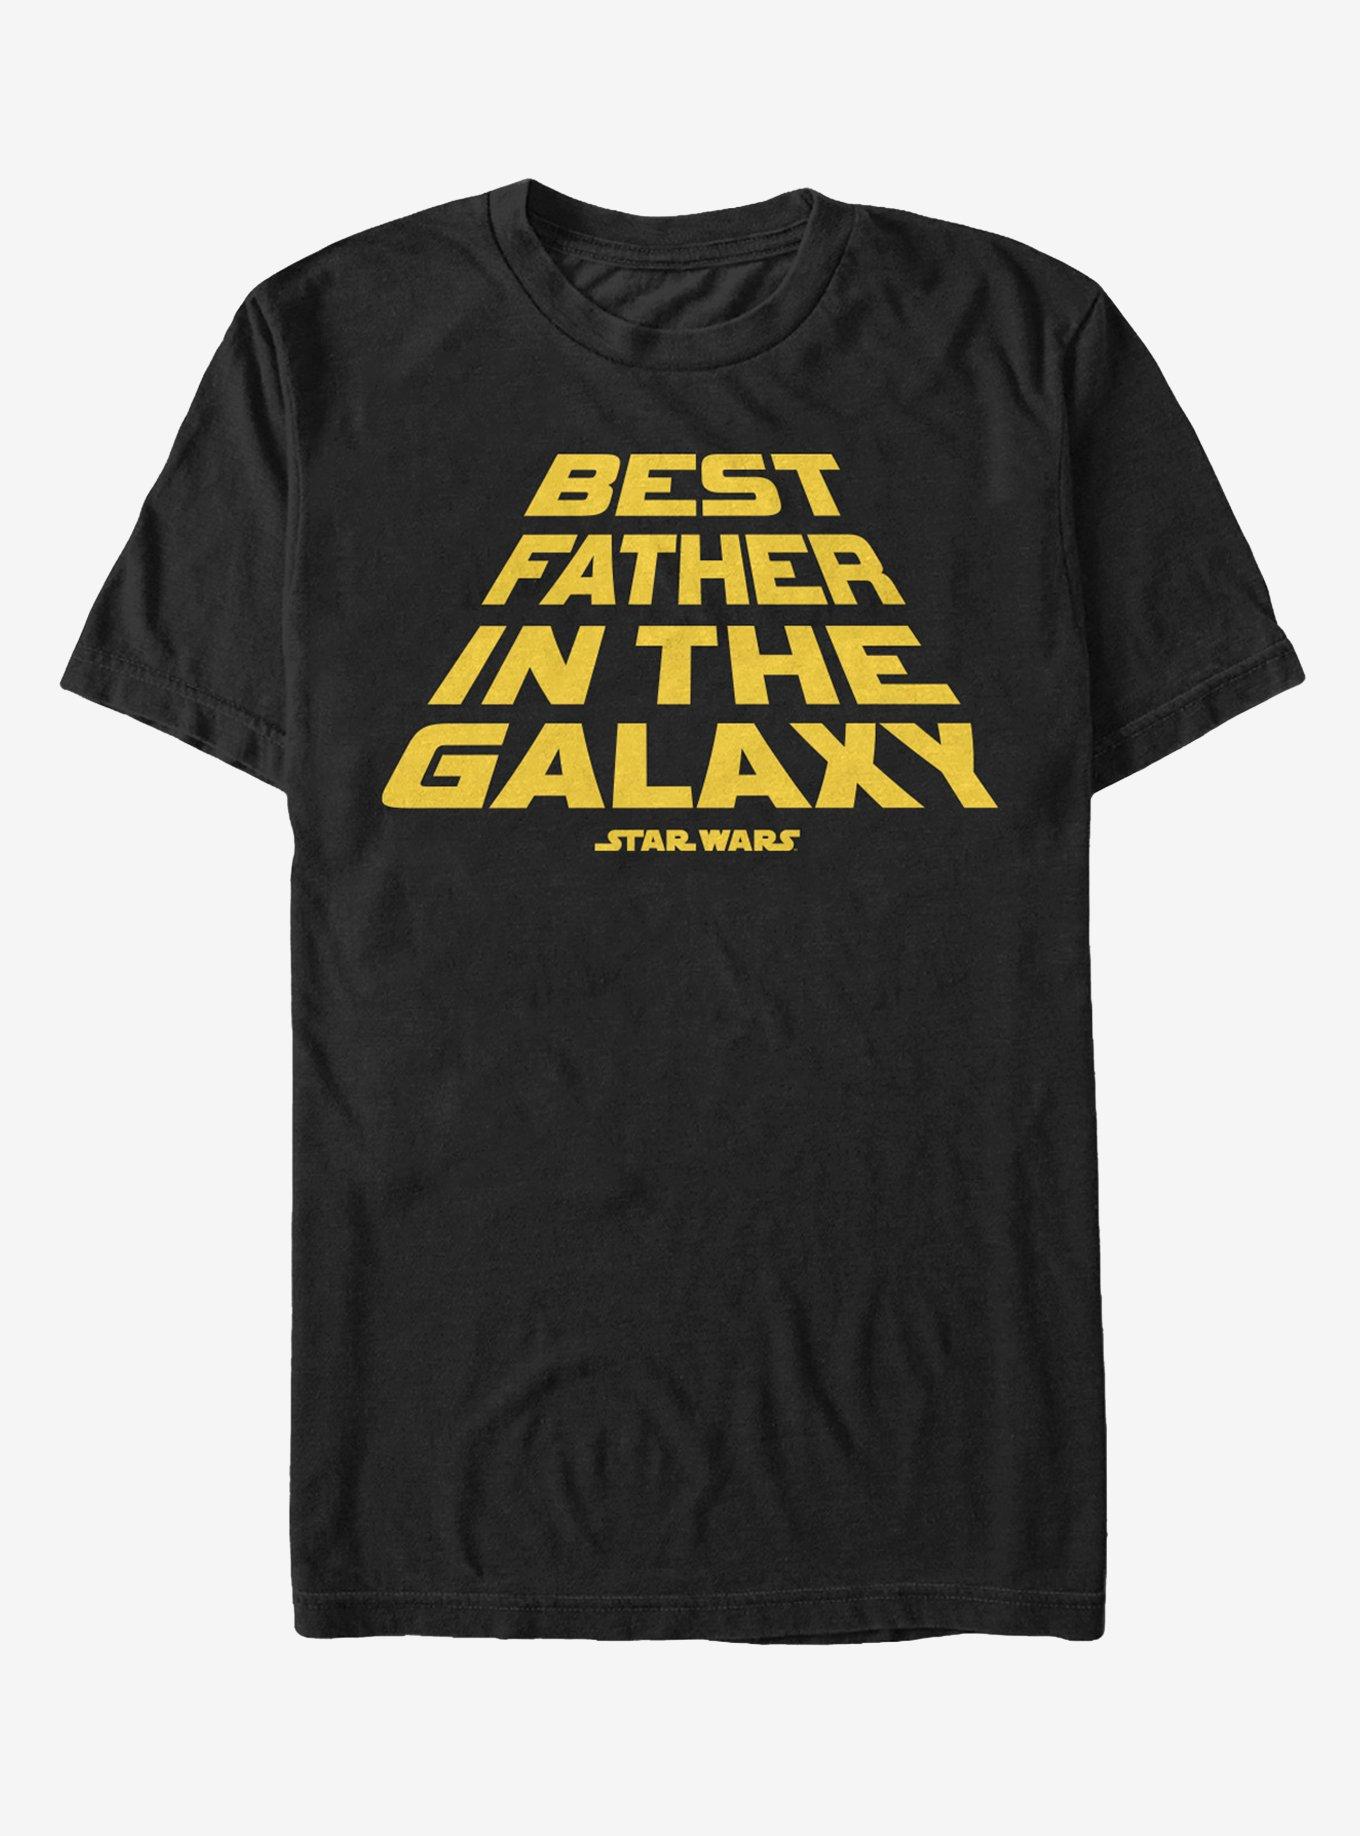 Star Wars Best Father In The Galaxy T-Shirt, BLACK, hi-res